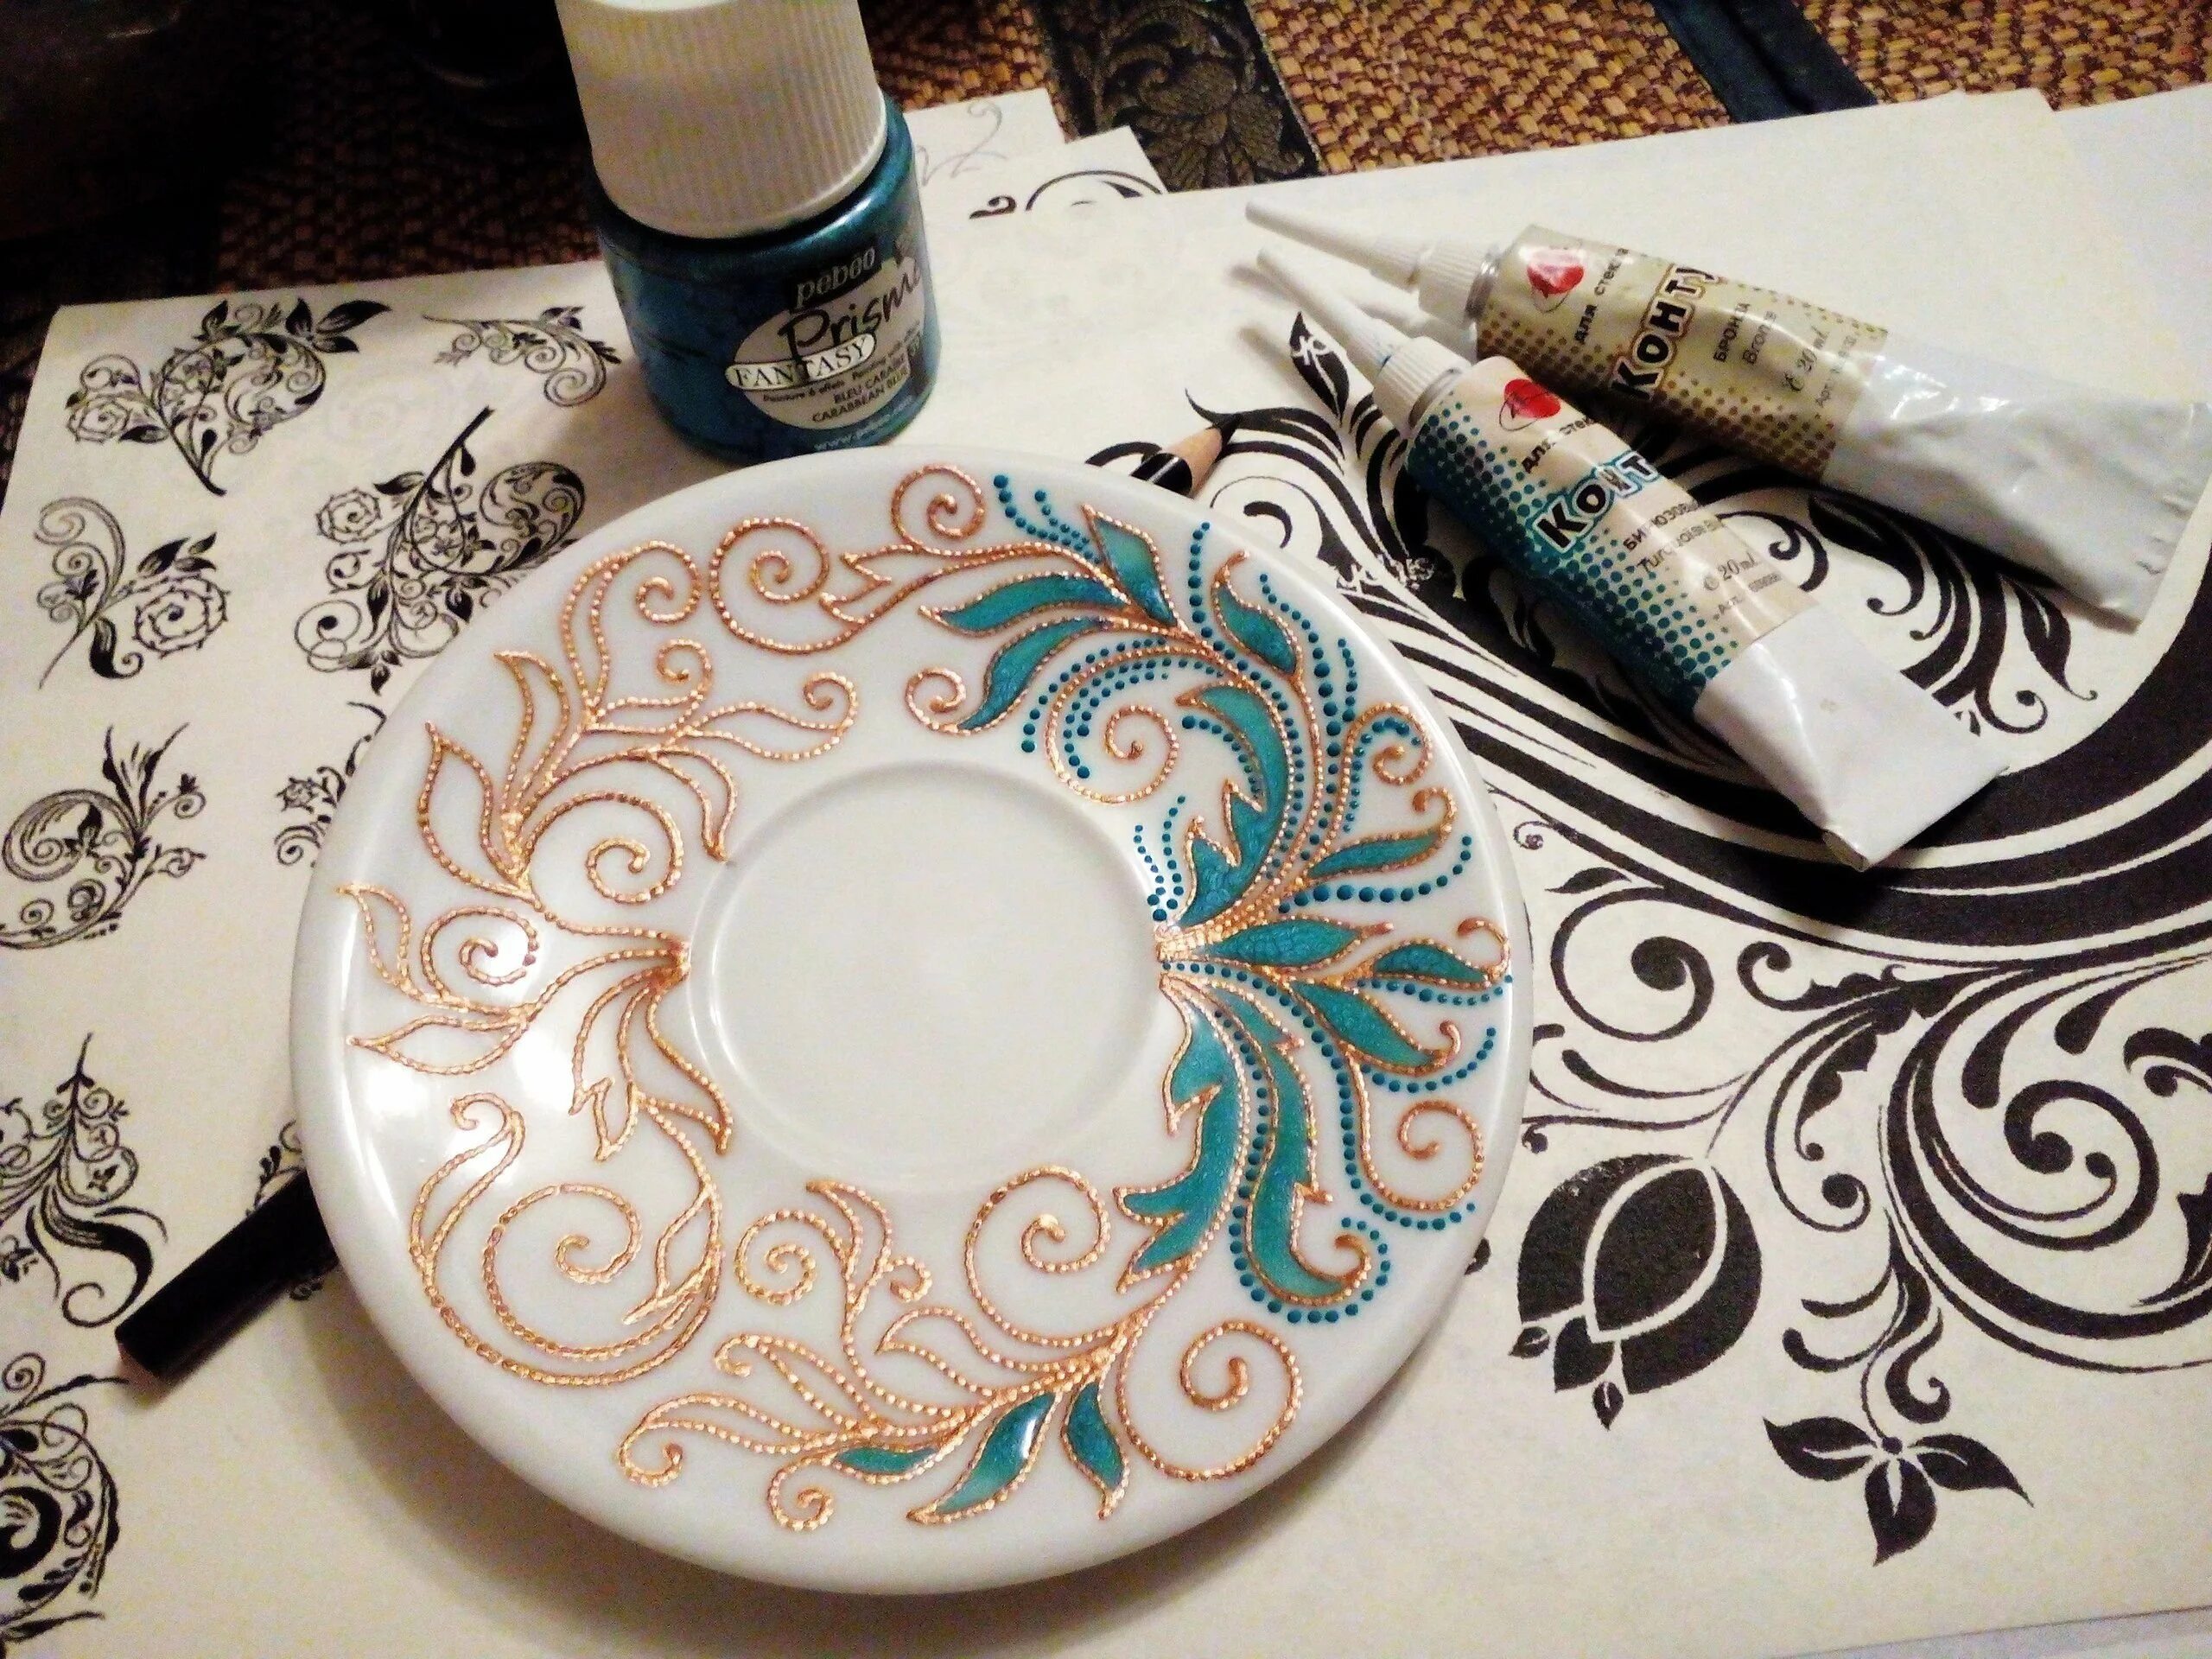 Plates with acrylics #2